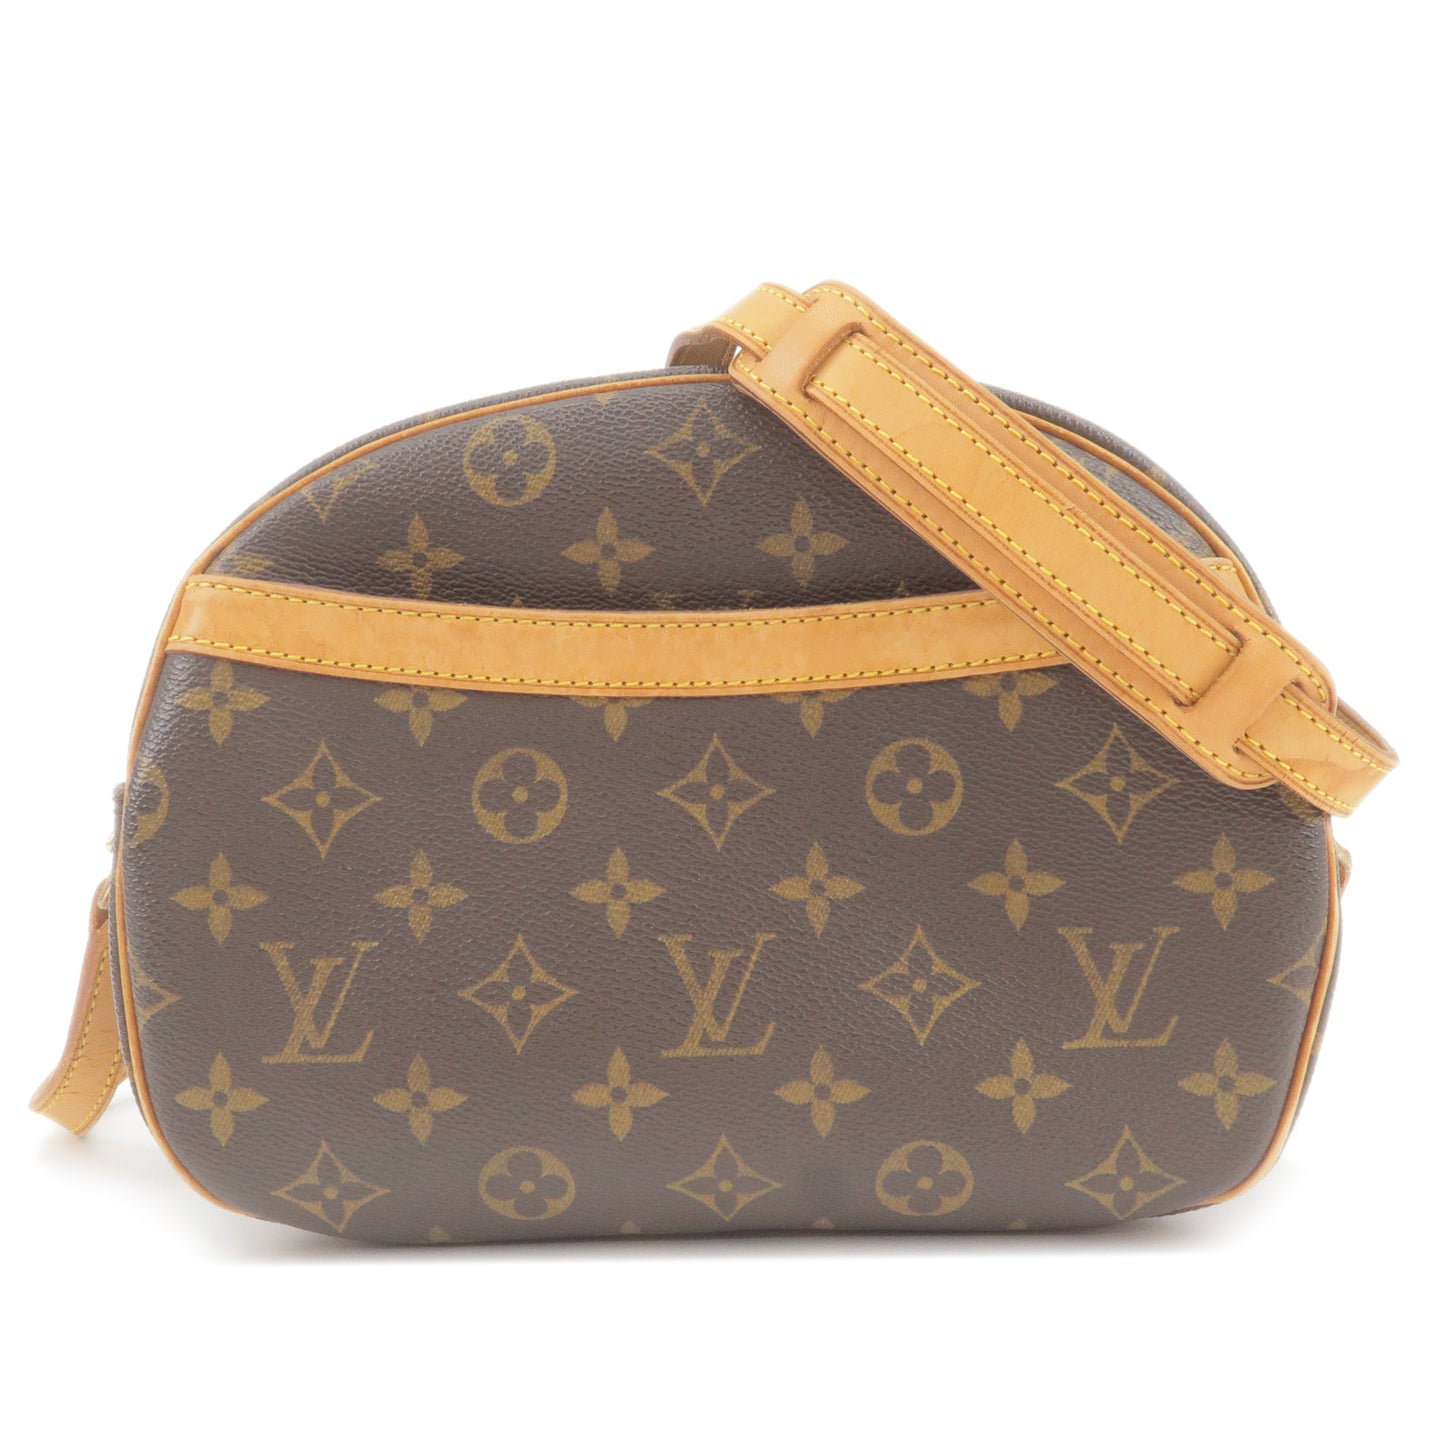 Shop for Louis Vuitton Monogram Canvas Leather Blois Crossbody Bag -  Shipped from USA